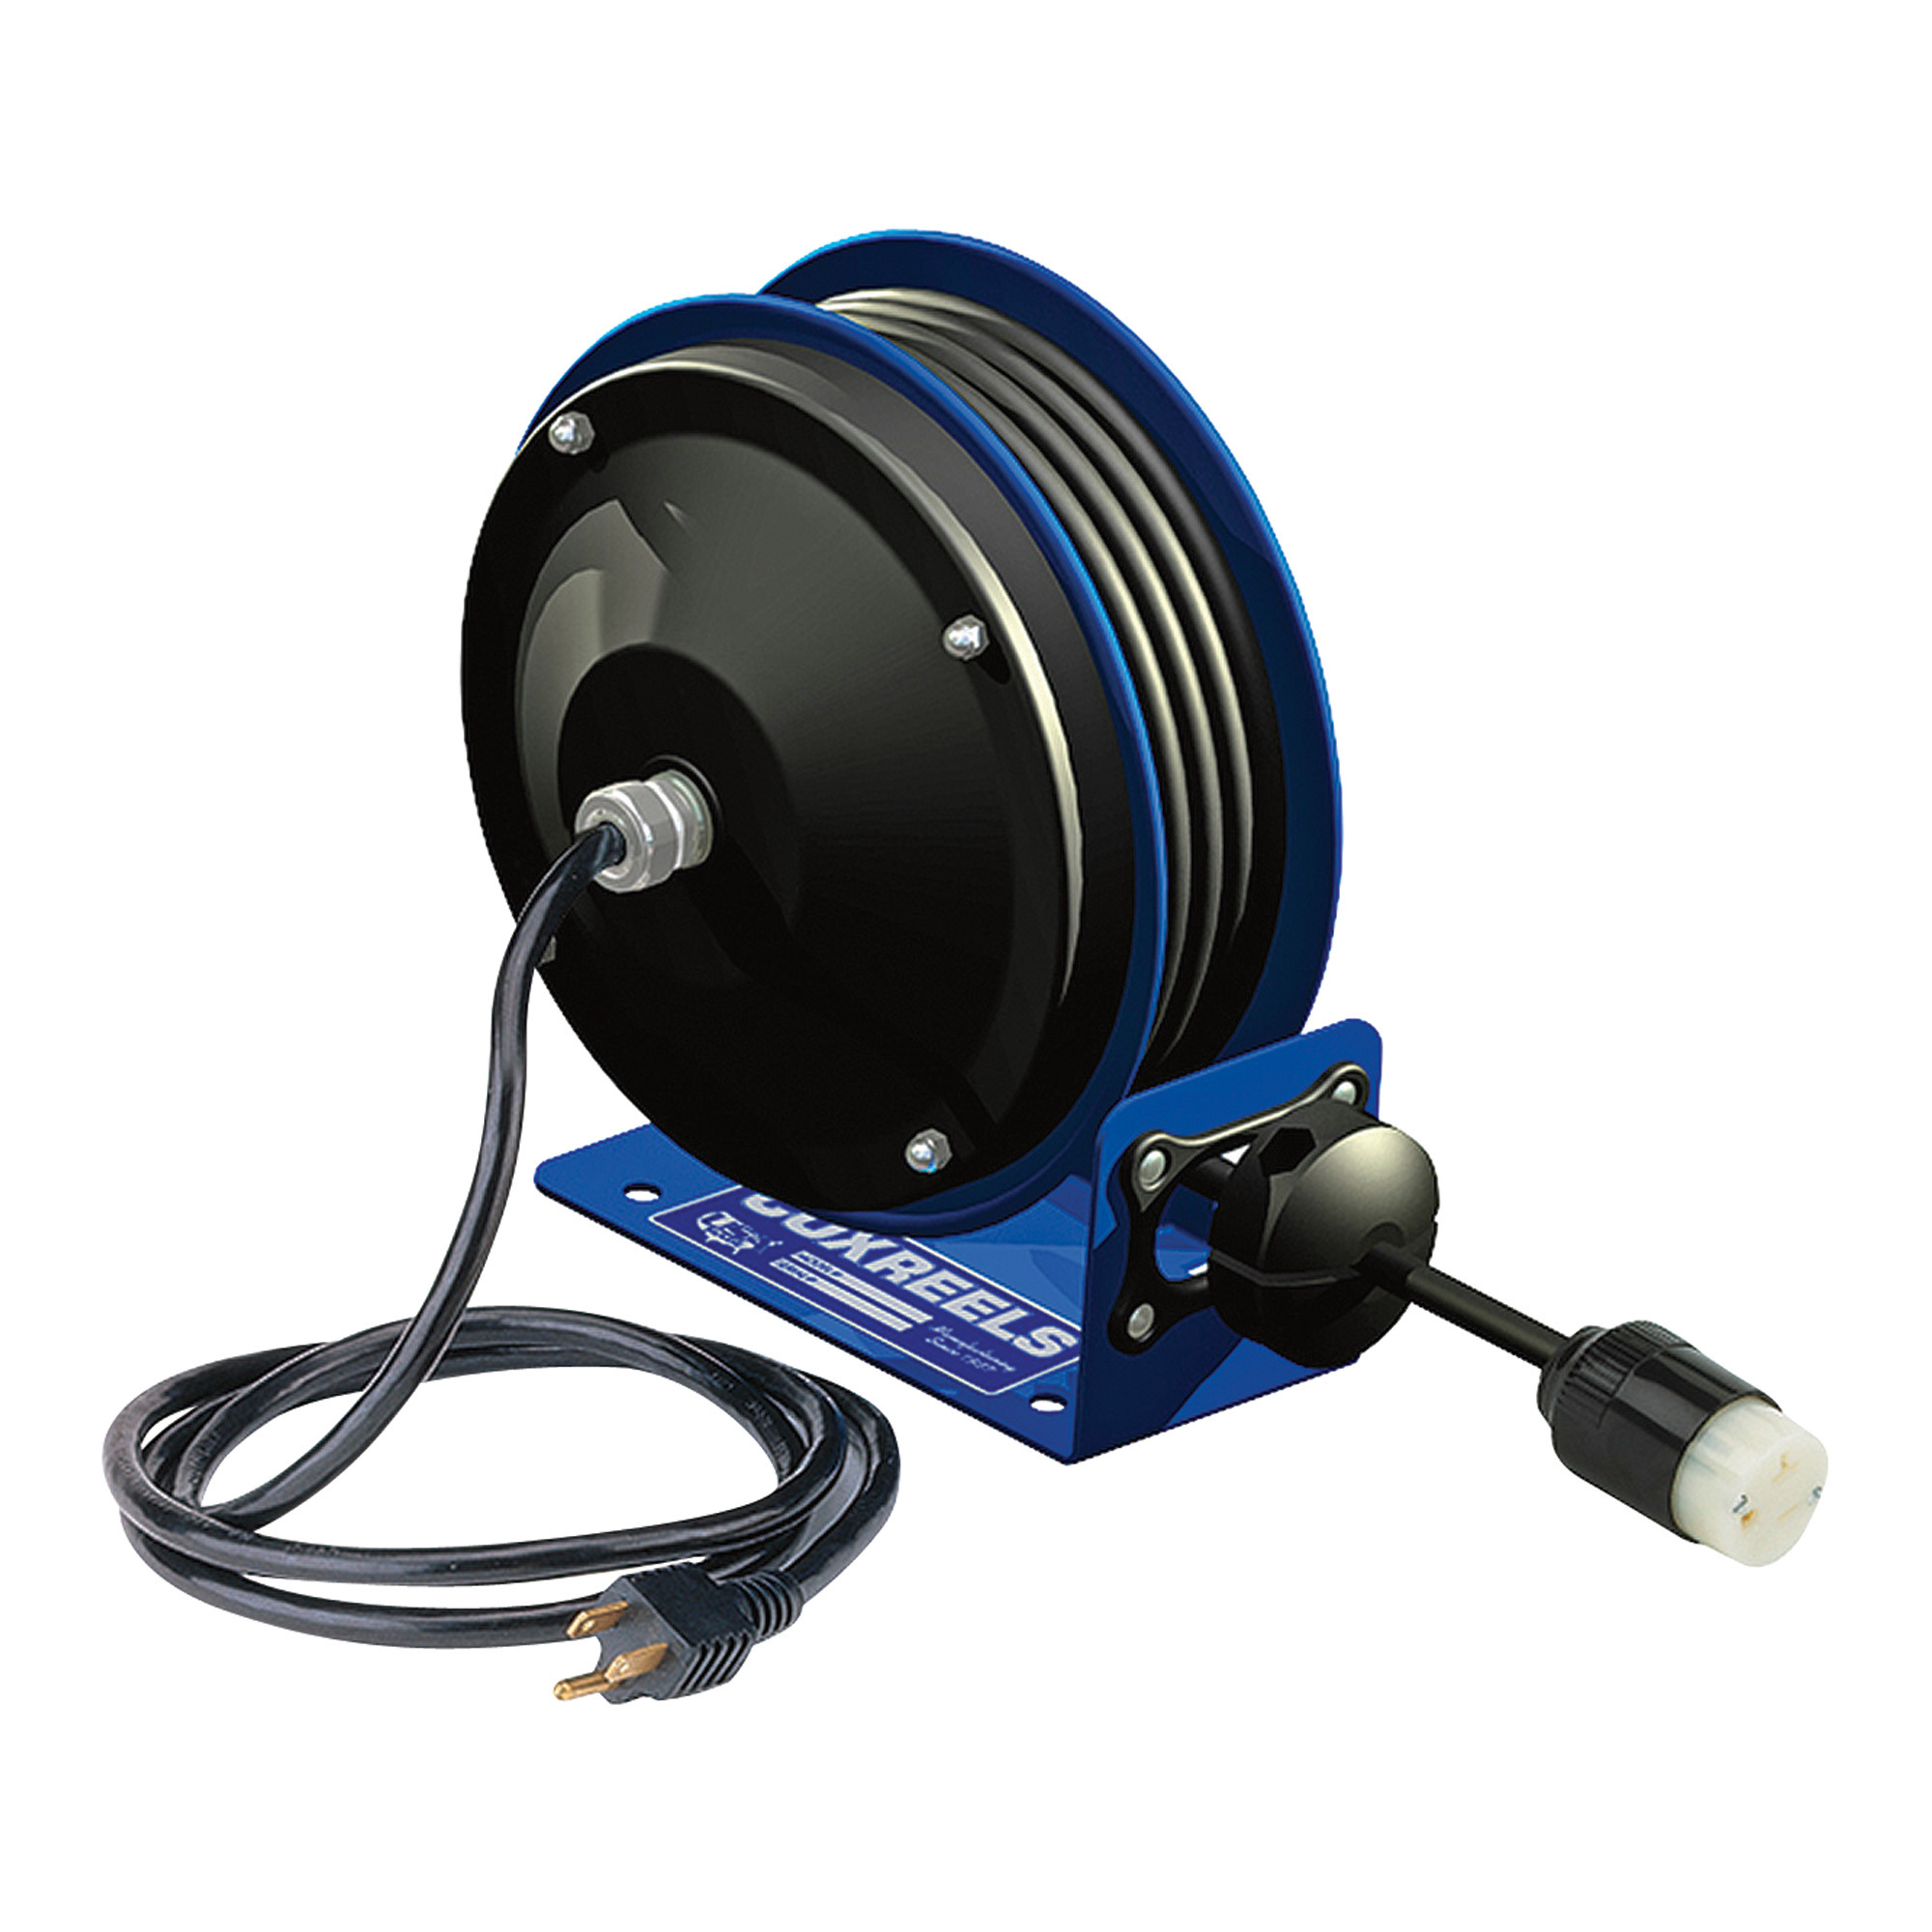 Single Receptacle cord Reel - 50 ft - 16 AWG